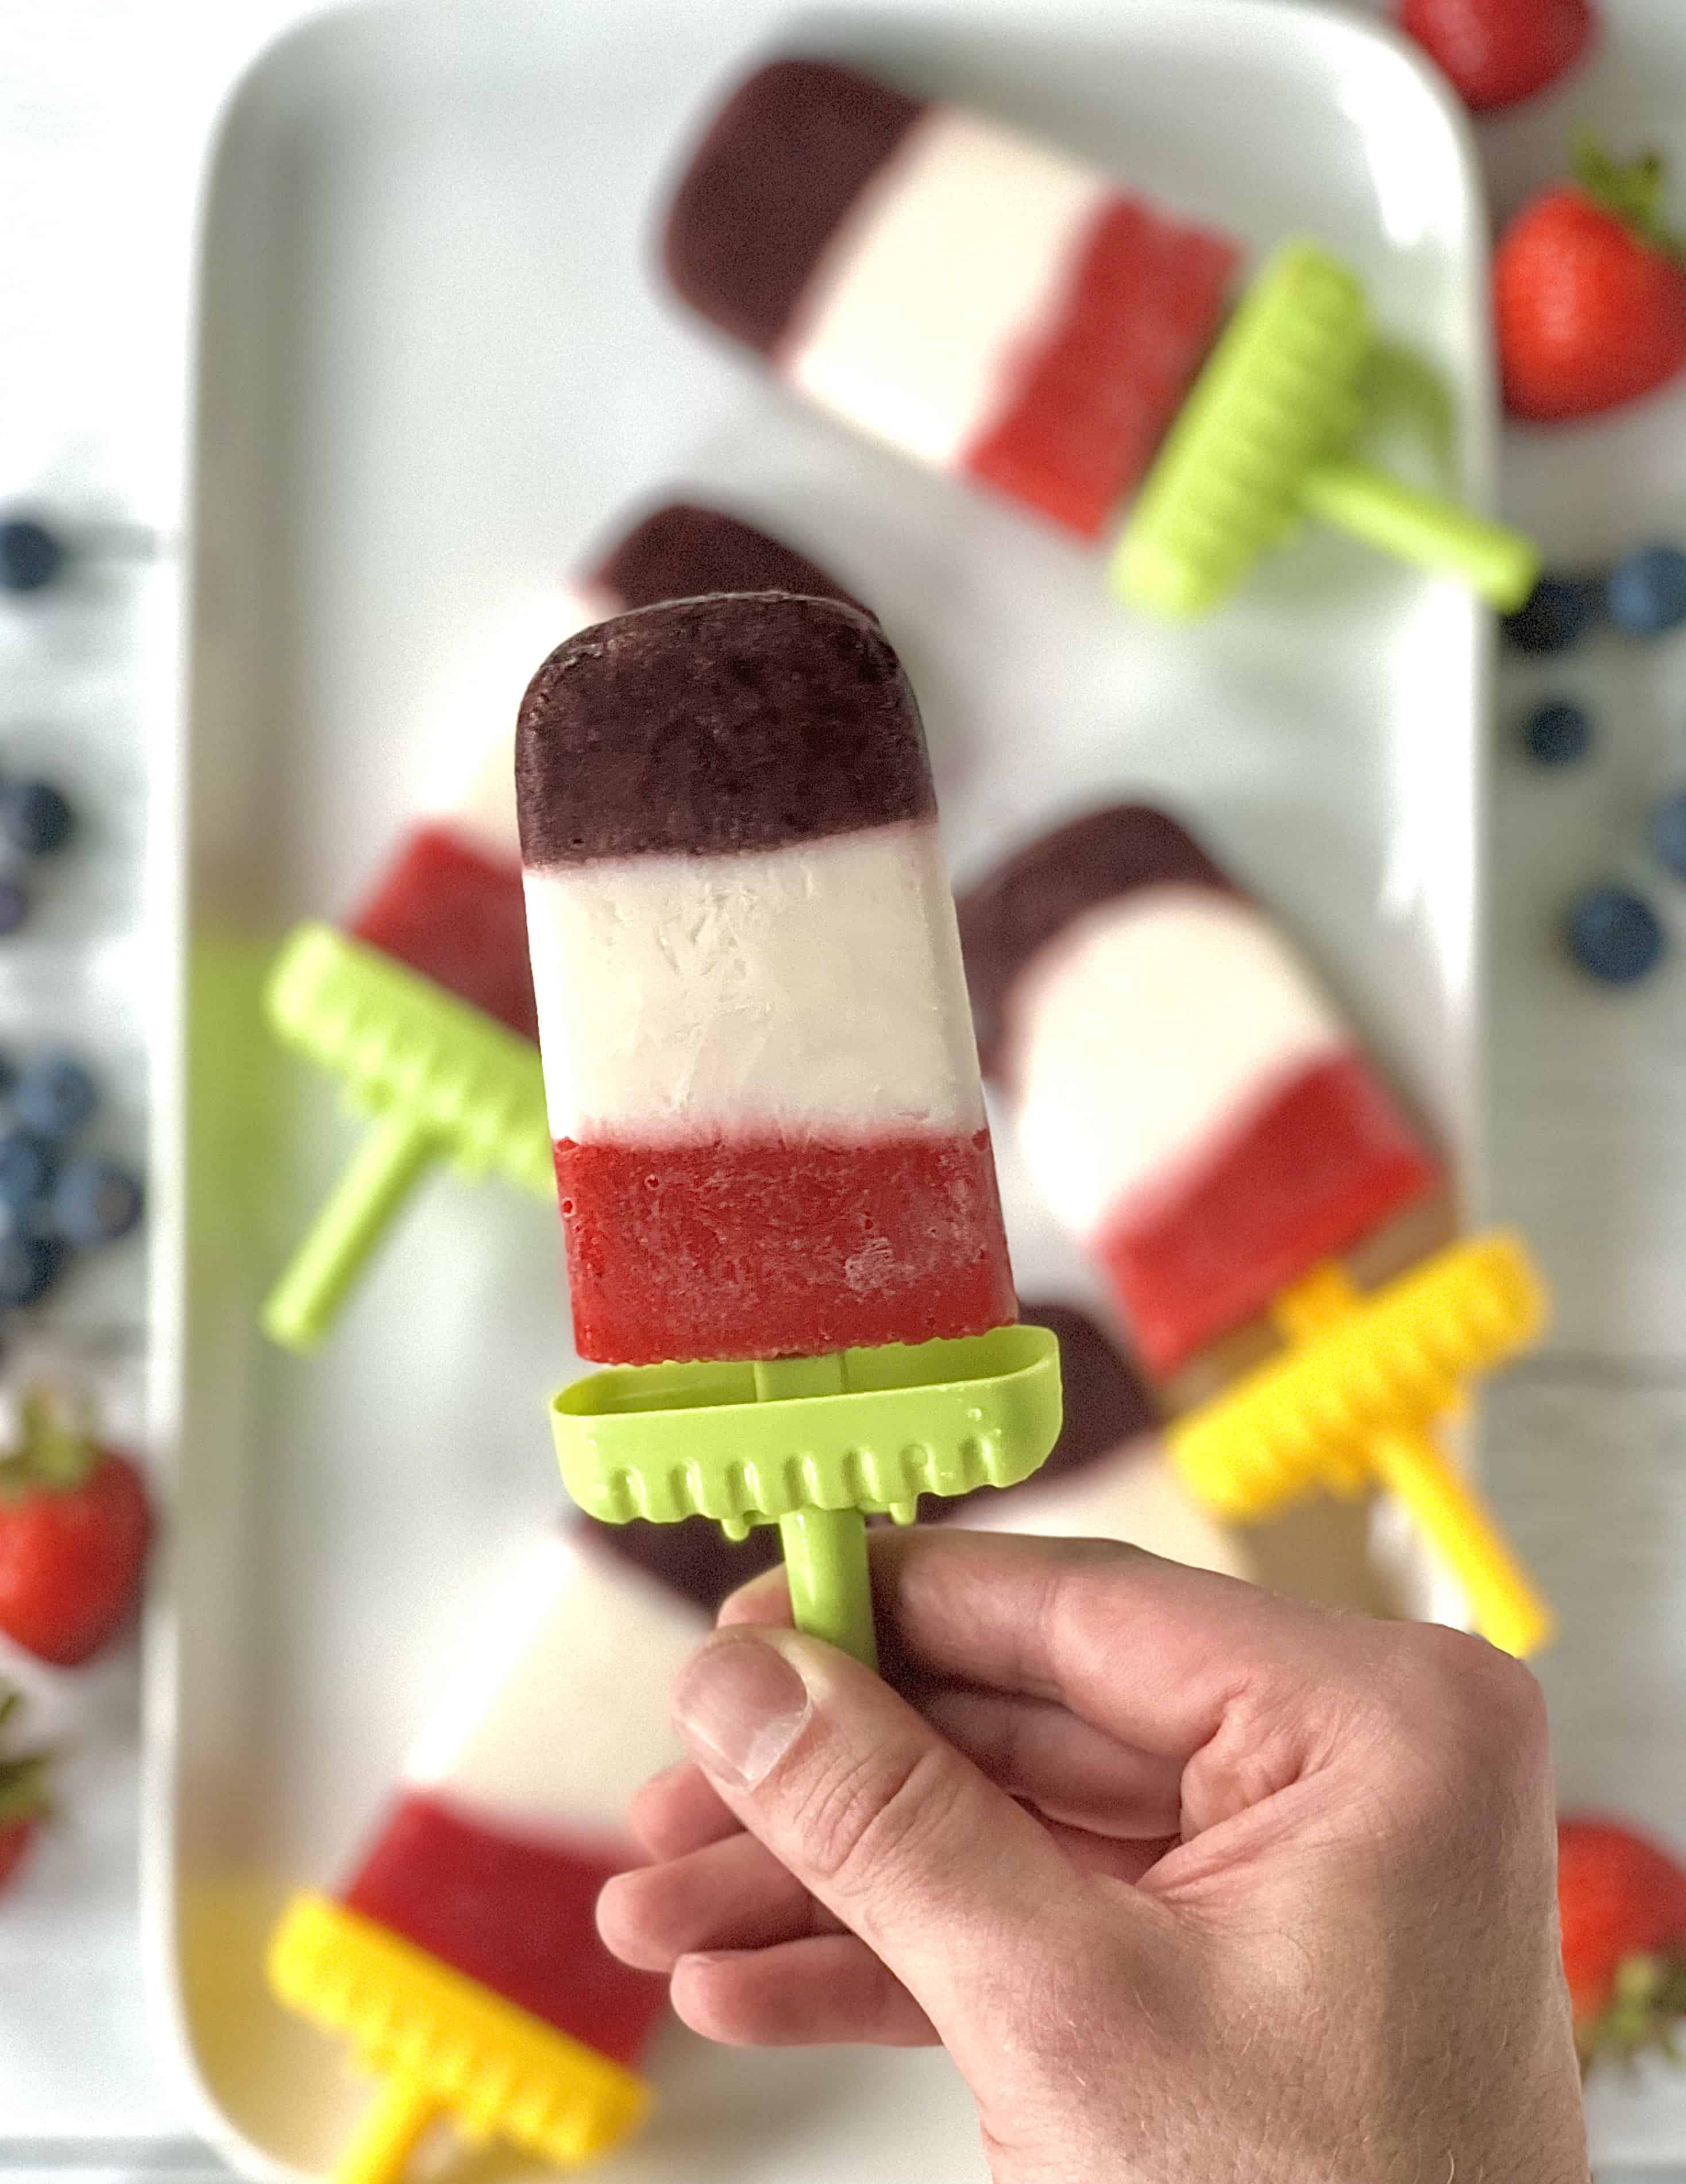 A red, blue and white popsicle being held up over a white platter of more popsicles.